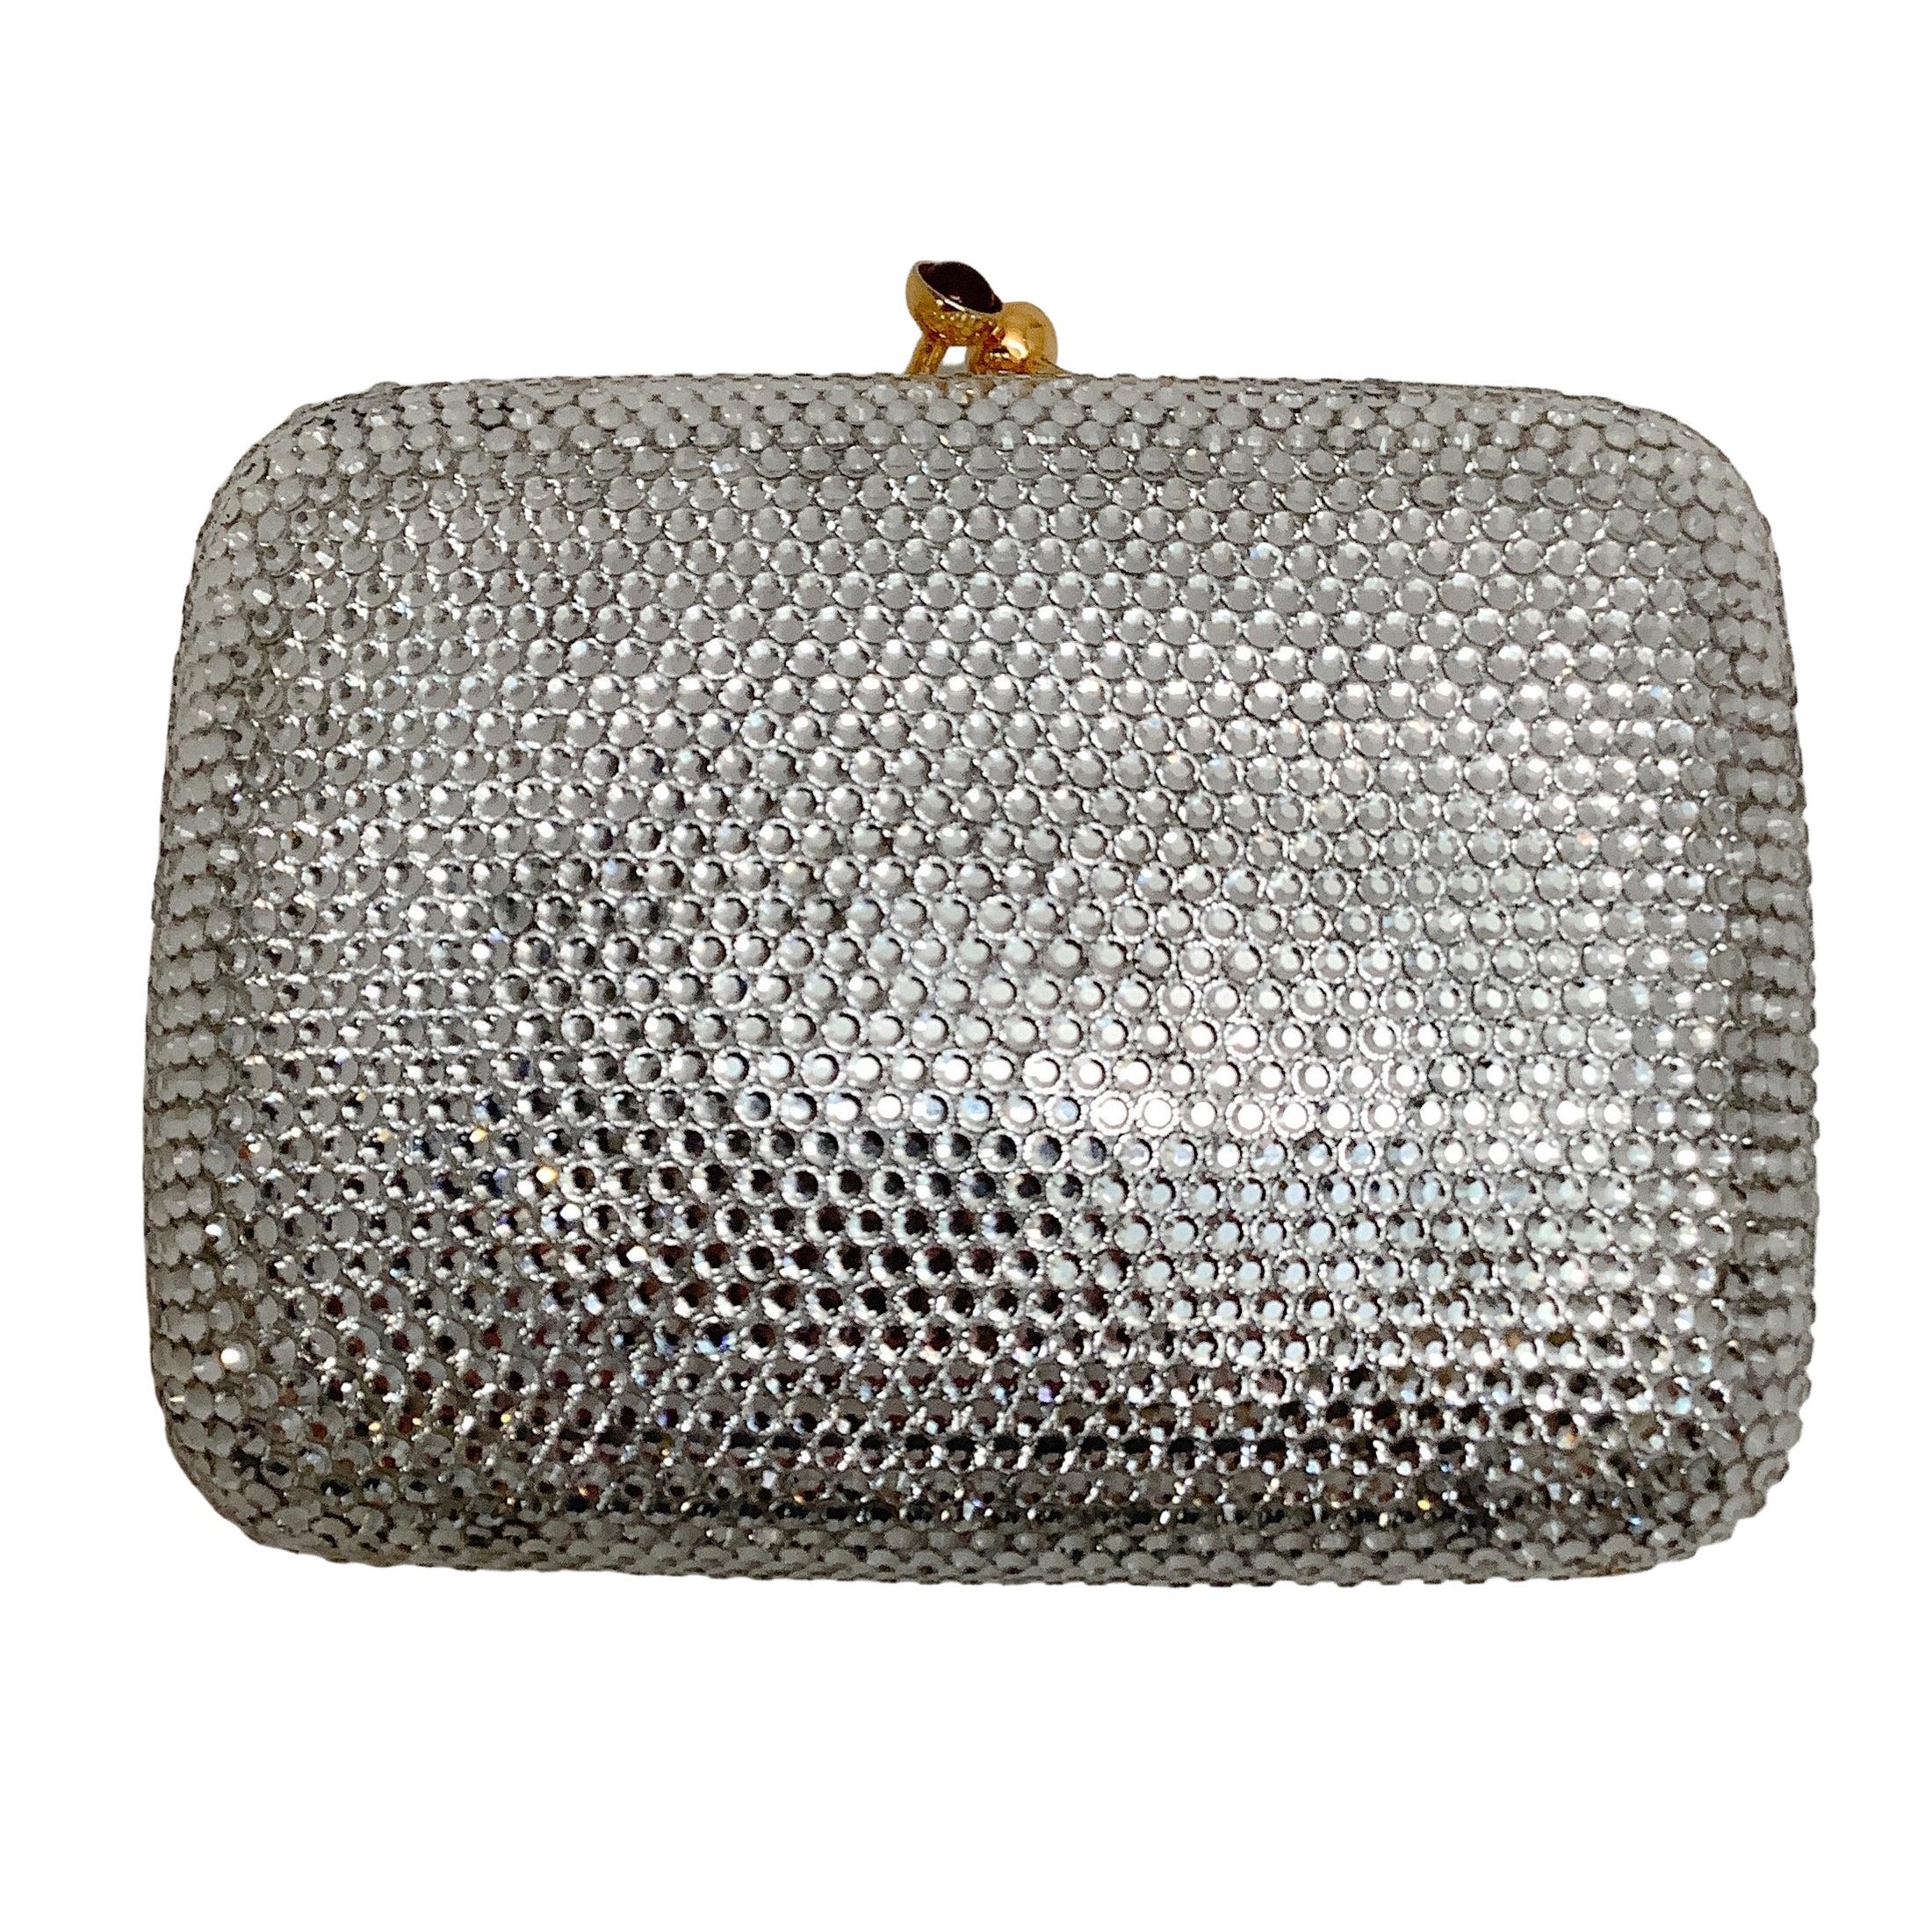 Judith Leiber Small Silver Crystal Embellished Minaudière Clutch